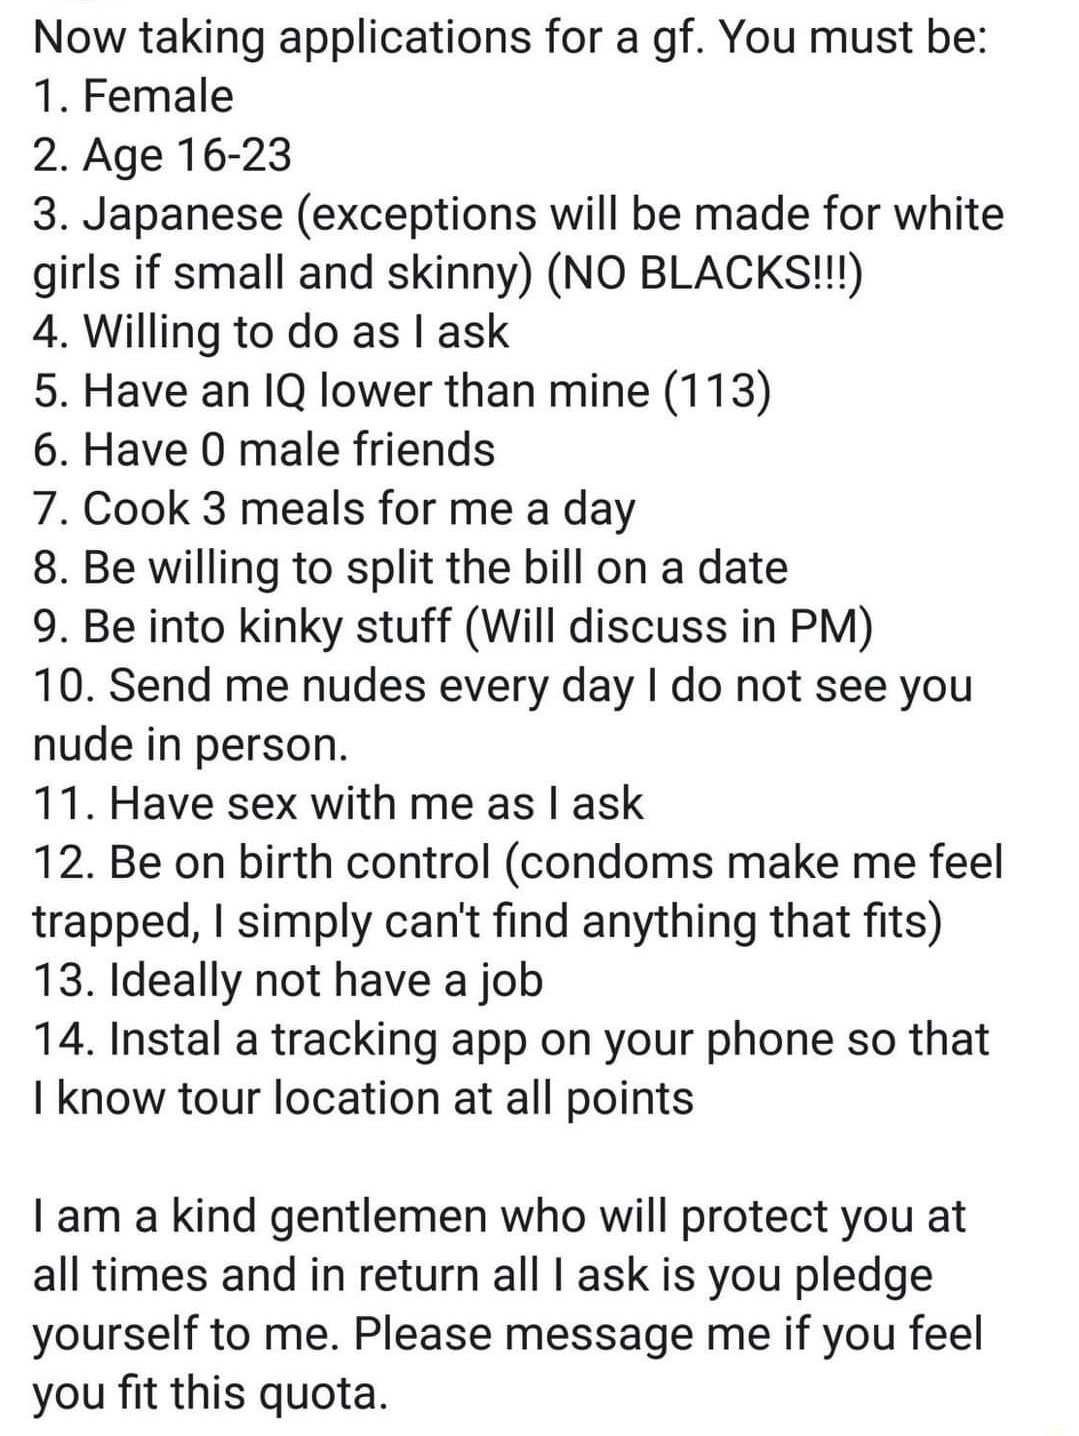 now taking applications for a gf - Now taking applications for a gf. You must be 1. Female 2. Age 1623 3. Japanese exceptions will be made for white girls if small and skinny No Blacks!!! 4. Willing to do as I ask 5. Have an Iq lower than mine 113 6. Have